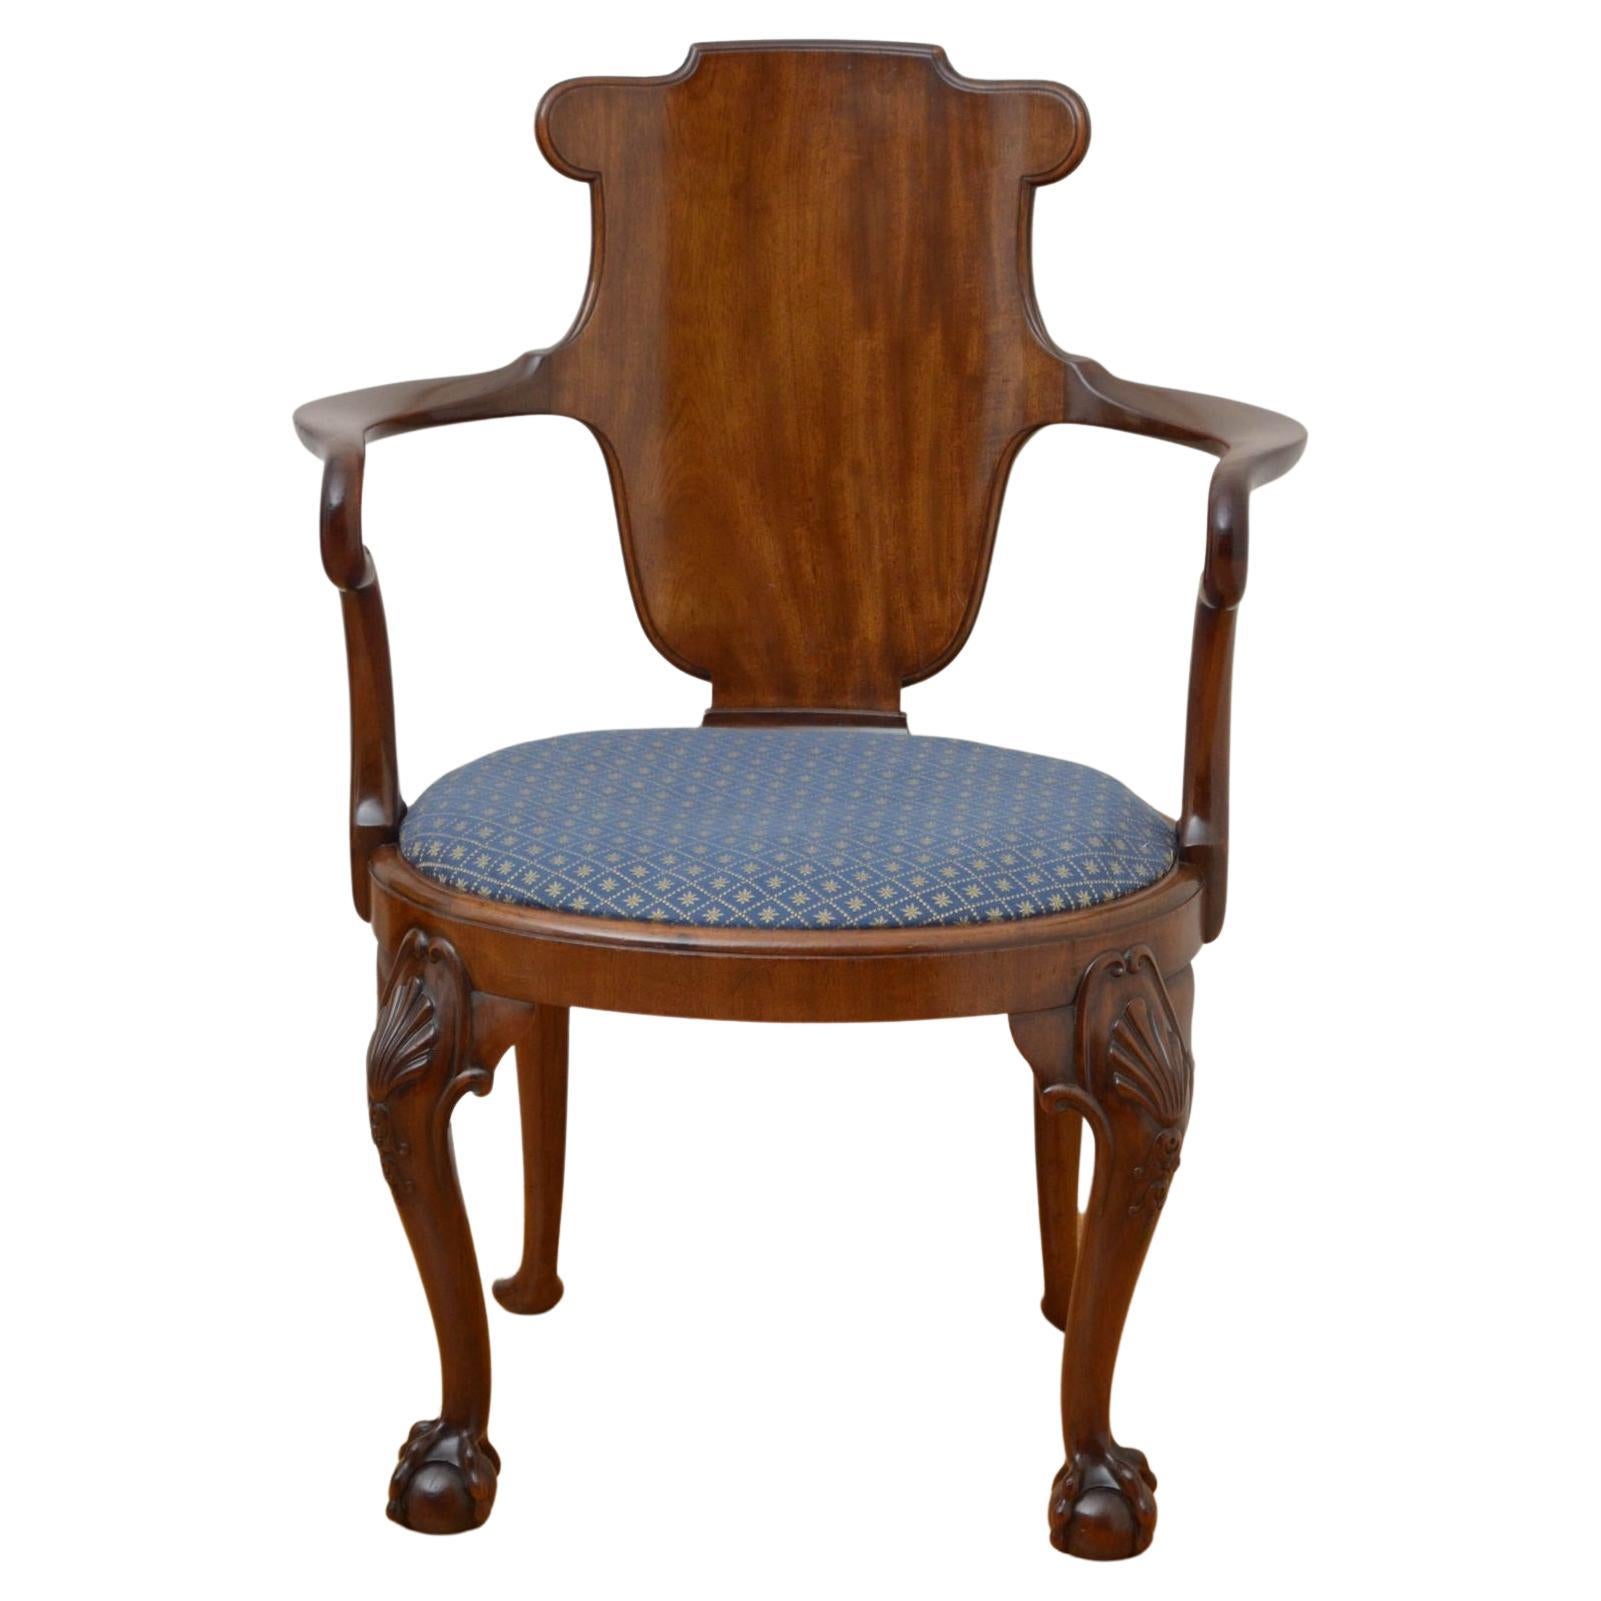 Early 20th century Gillows Design Chair in Mahogany For Sale